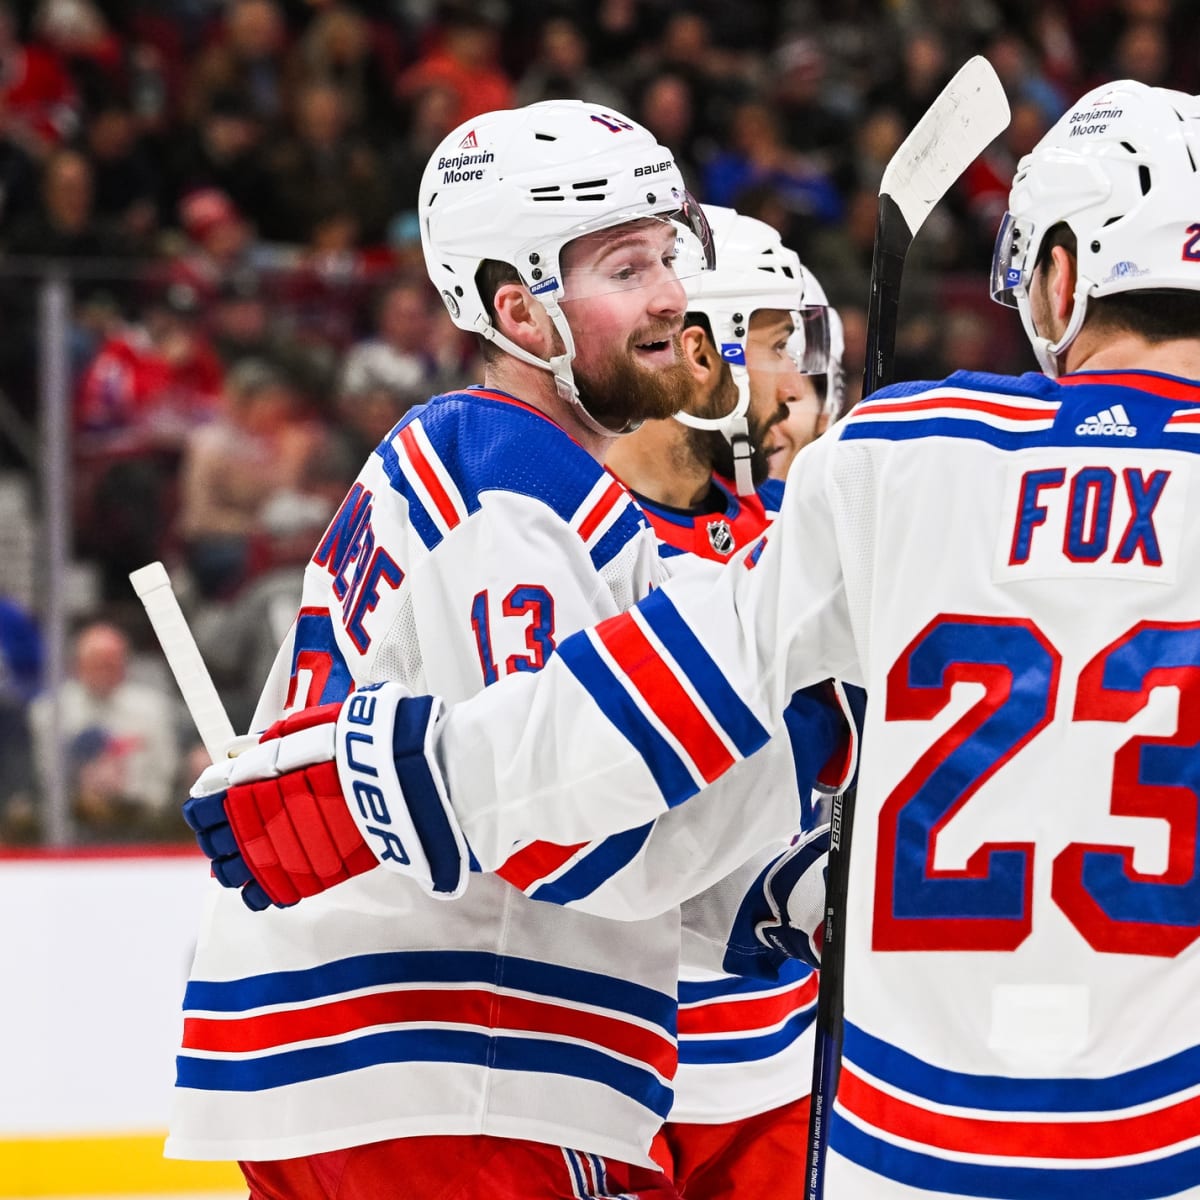 Alexis Lafreniere's fight went long way with Rangers teammates